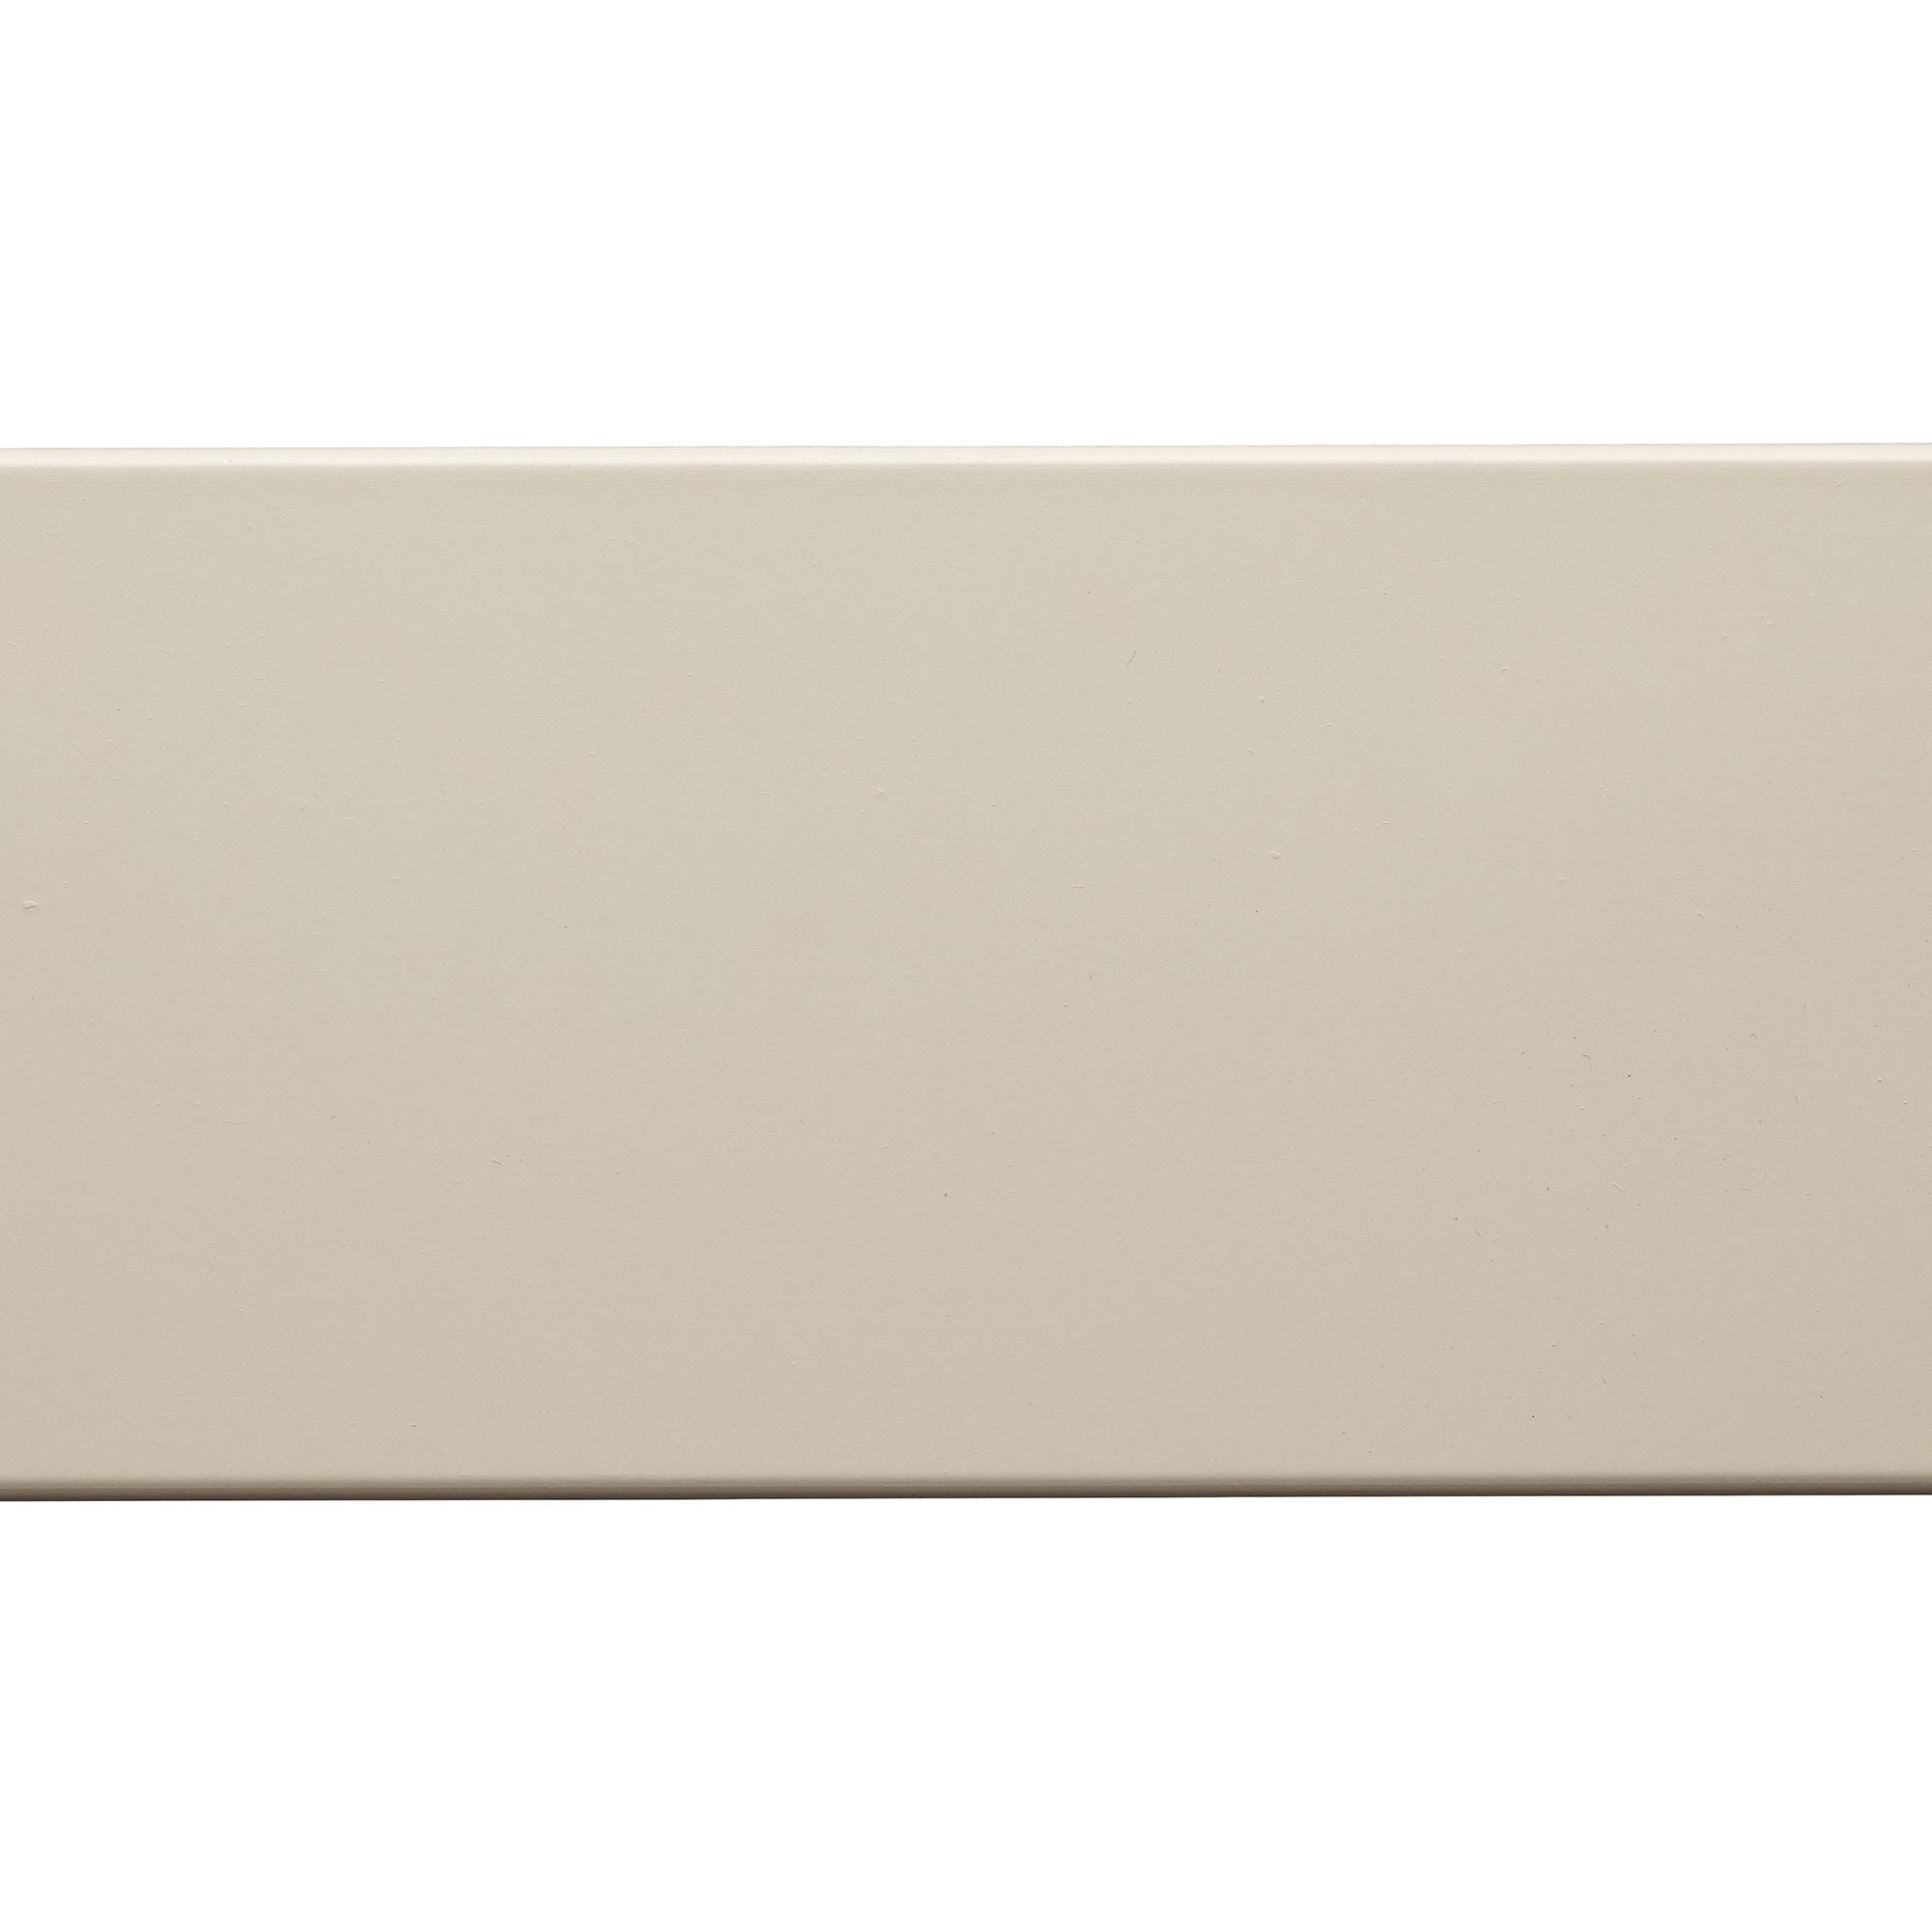 FINISHED ELEGANCE 1 in. x 8 in. x 8 ft. MDF Molding Board 10003316